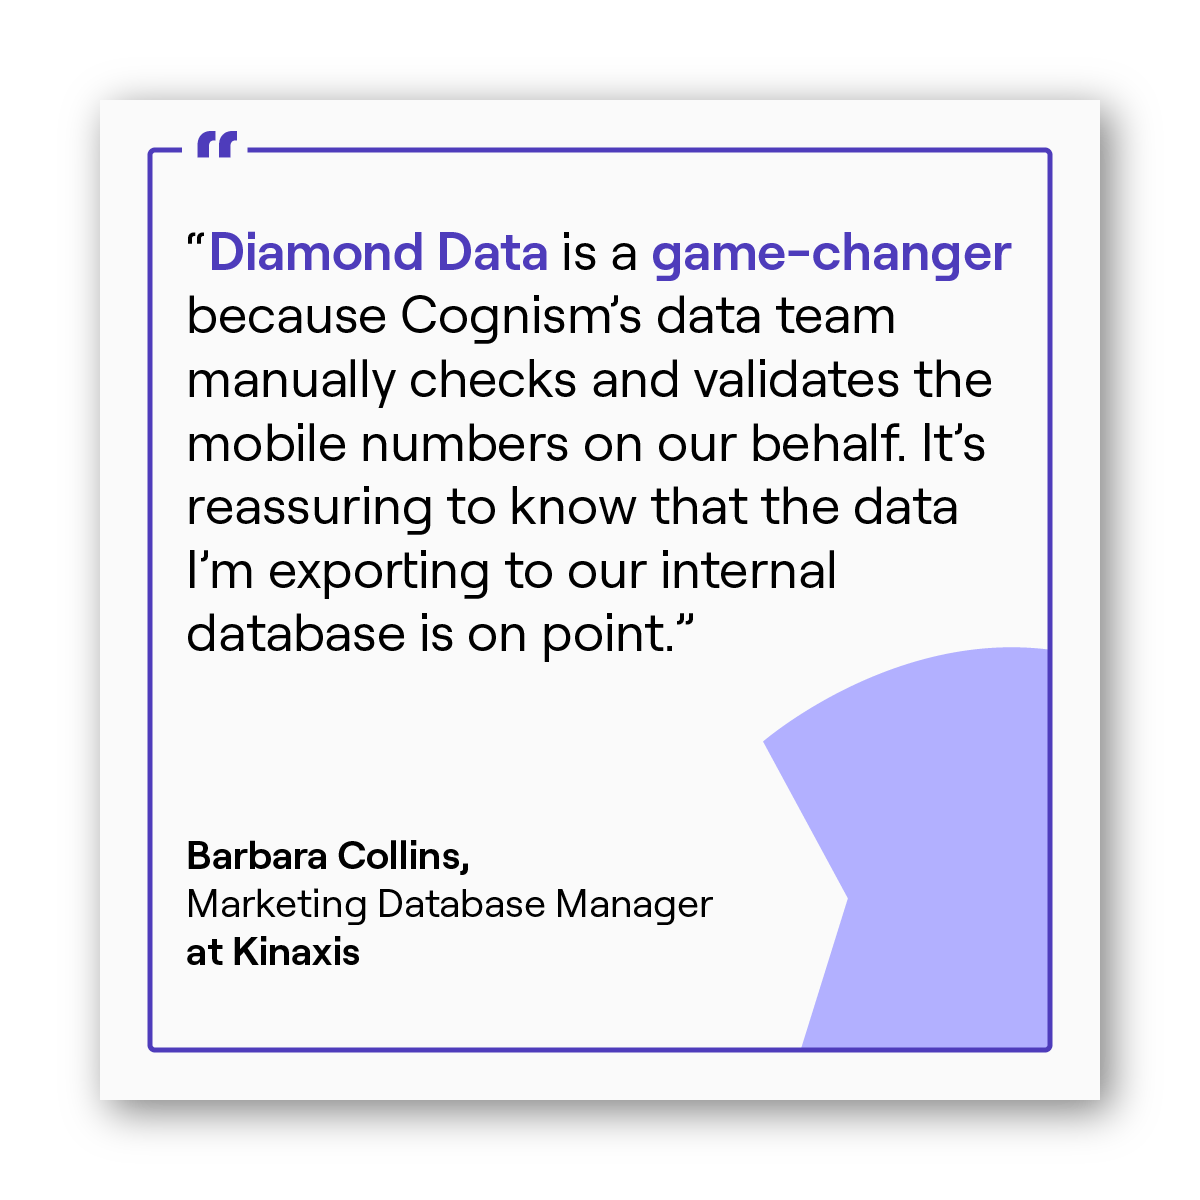 Diamond Data is a game-changer for Kinaxis. Uplead vs ZoomInfo do not offer a similar service.